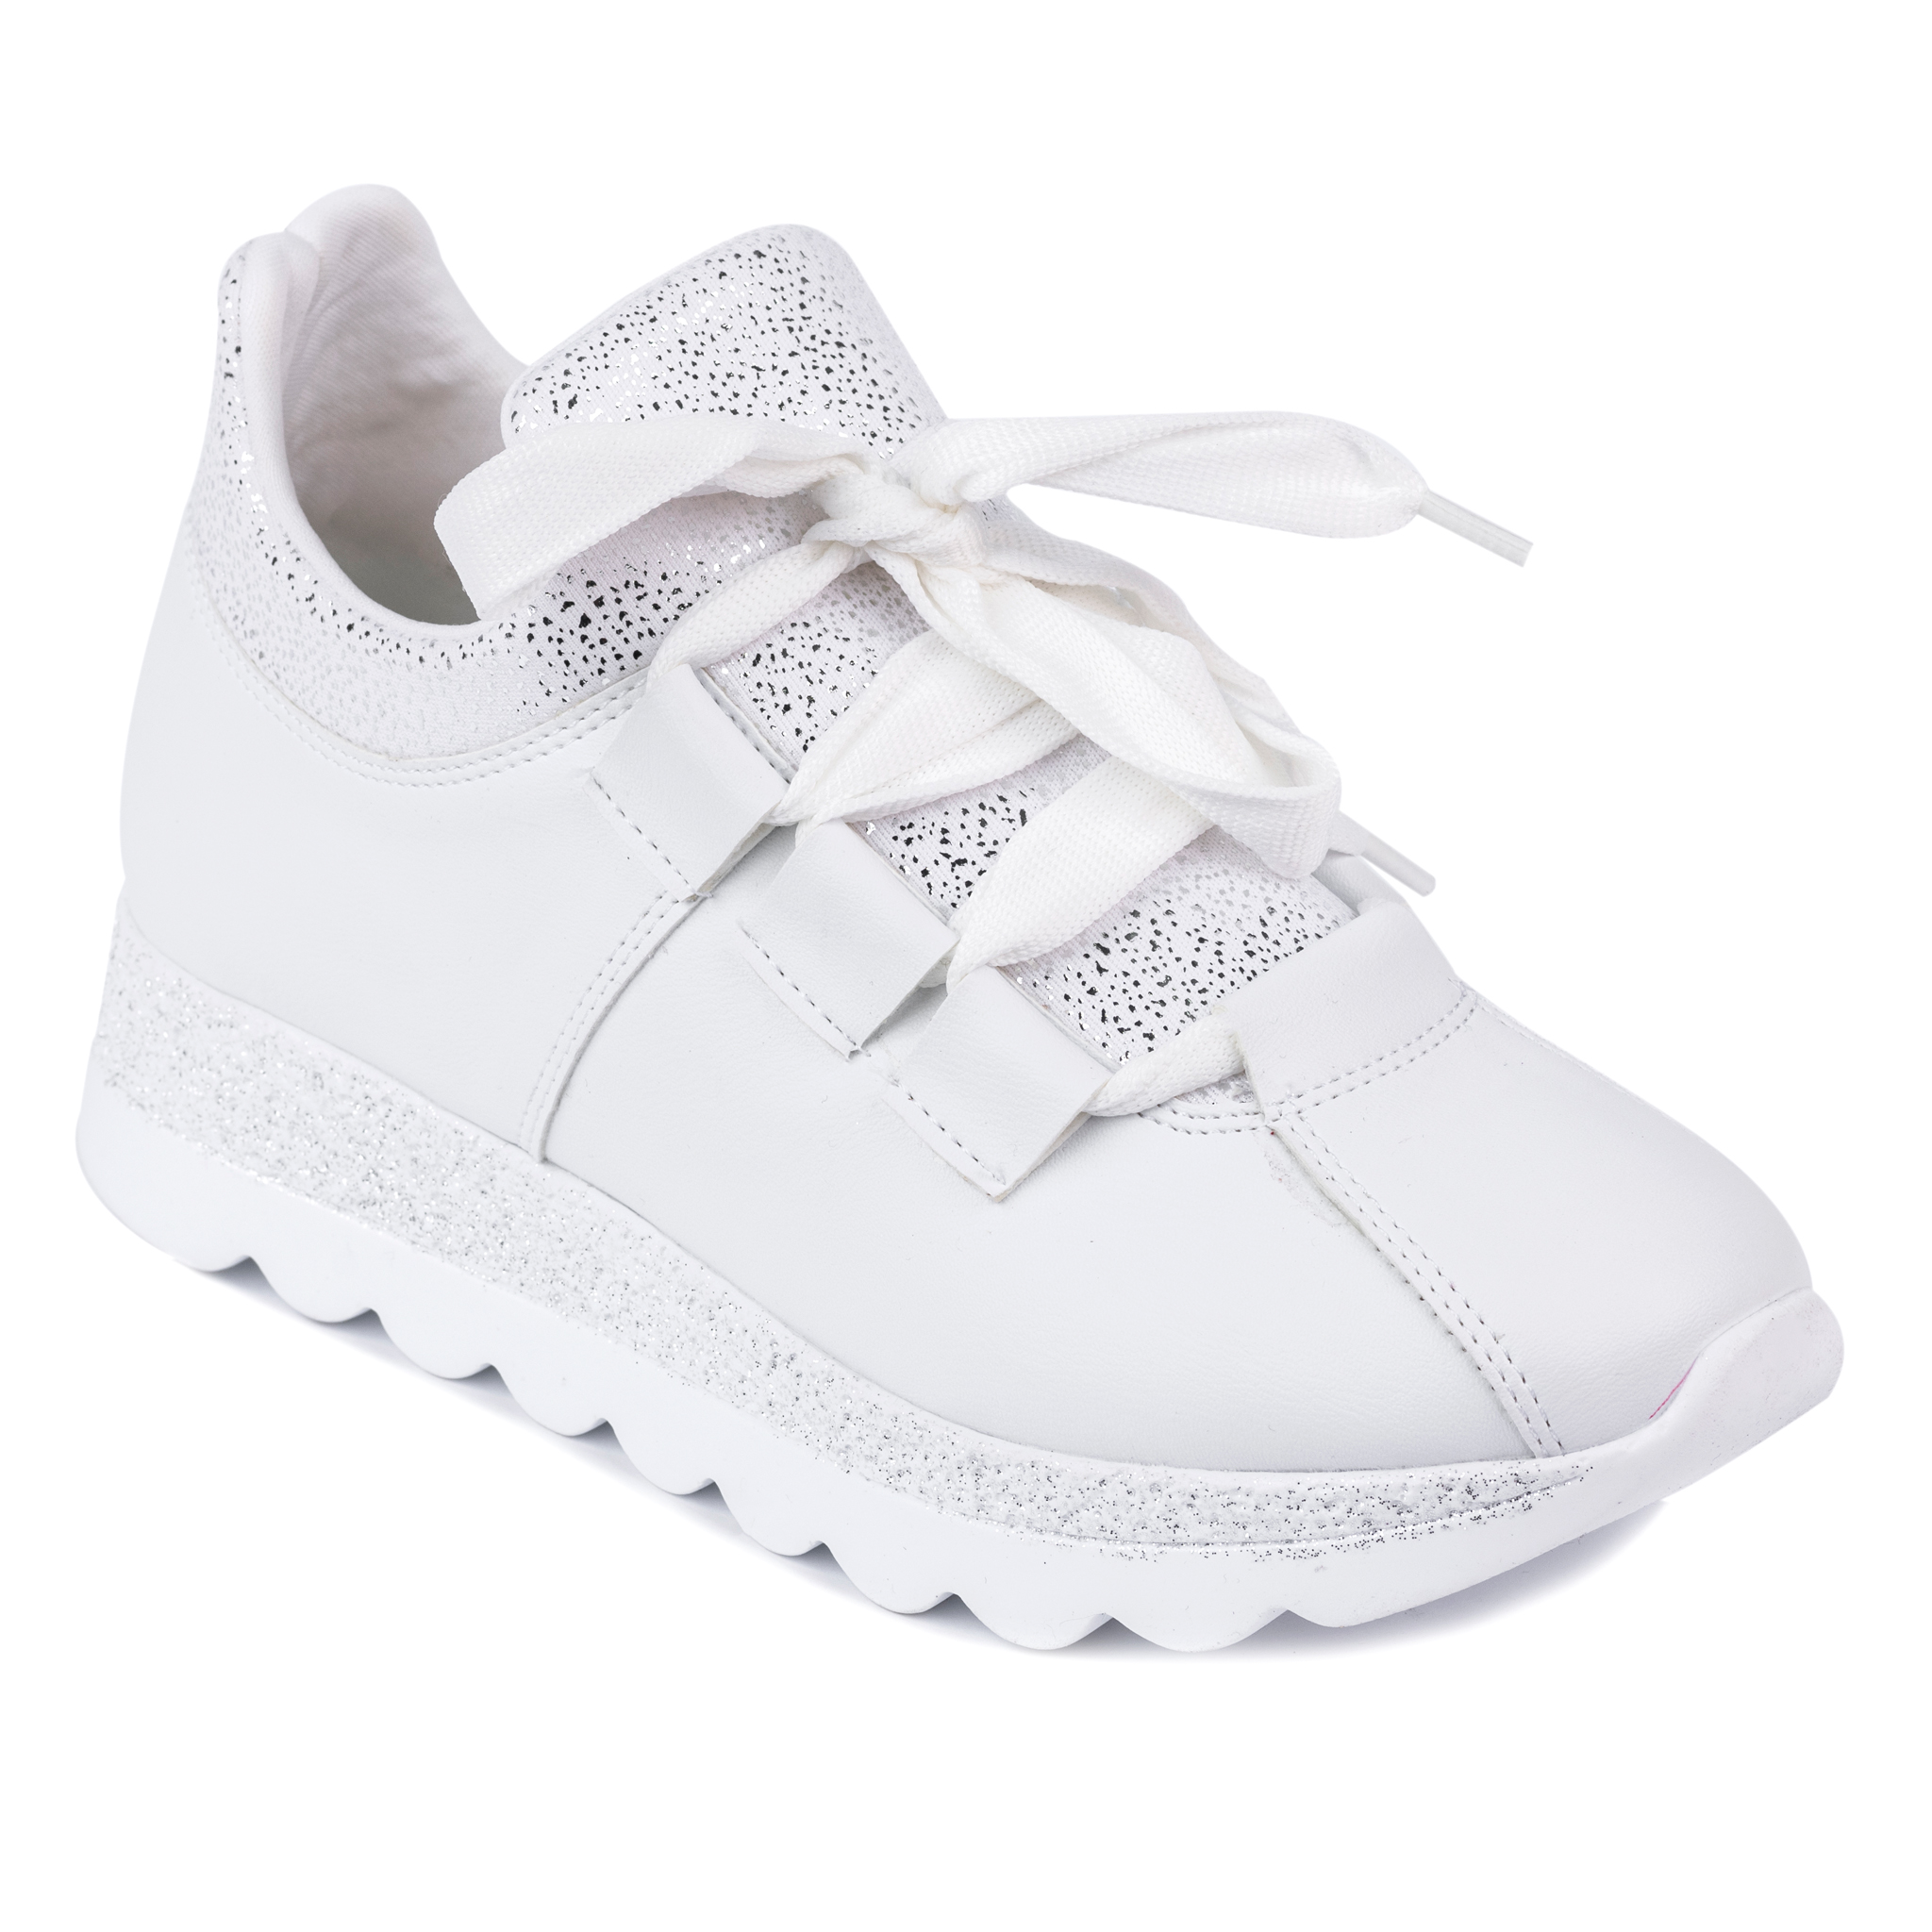 STRASS SNEAKERS - WHITE